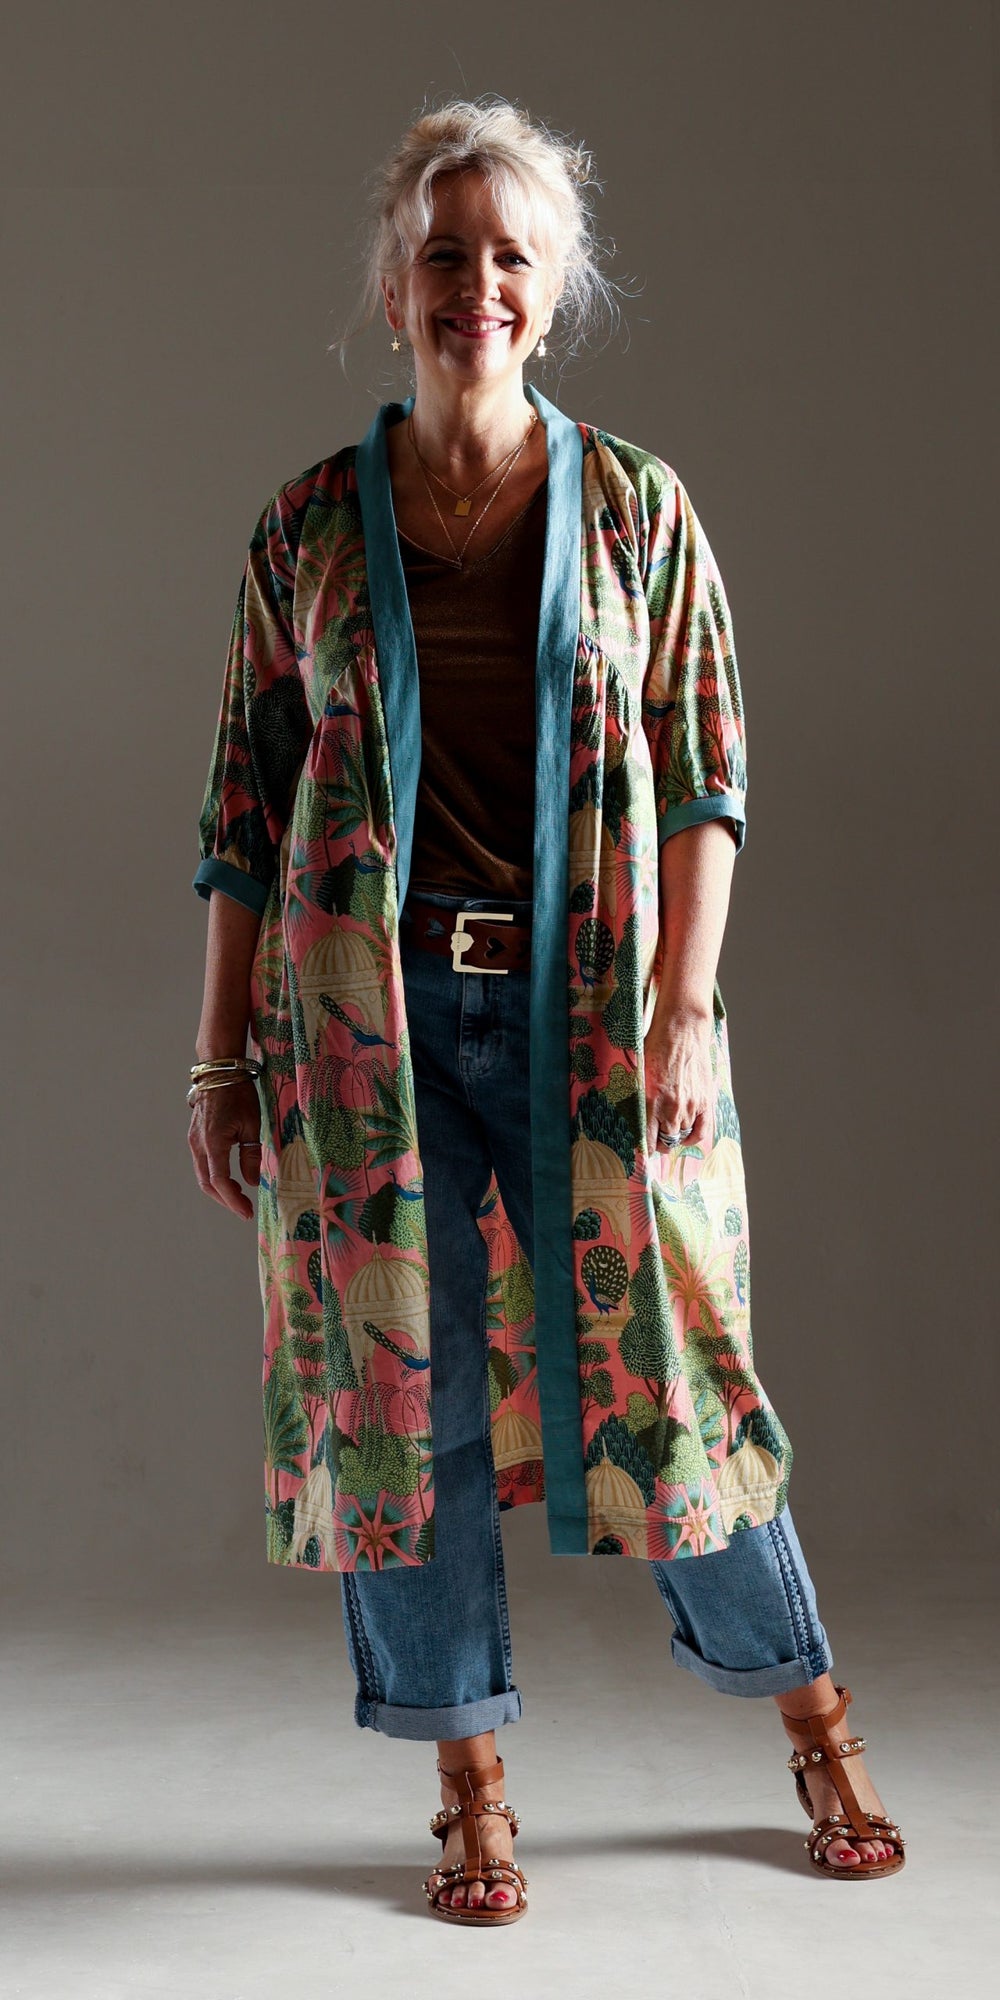 Woman wearing the Joti Duster Jacket sewing pattern from Sew Different on The Fold Line. A duster jacket pattern made in lightweight cotton, viscose, rayon or lightweight linen fabrics, featuring a relaxed fit, midi length, back yoke, in-seam pockets, dro